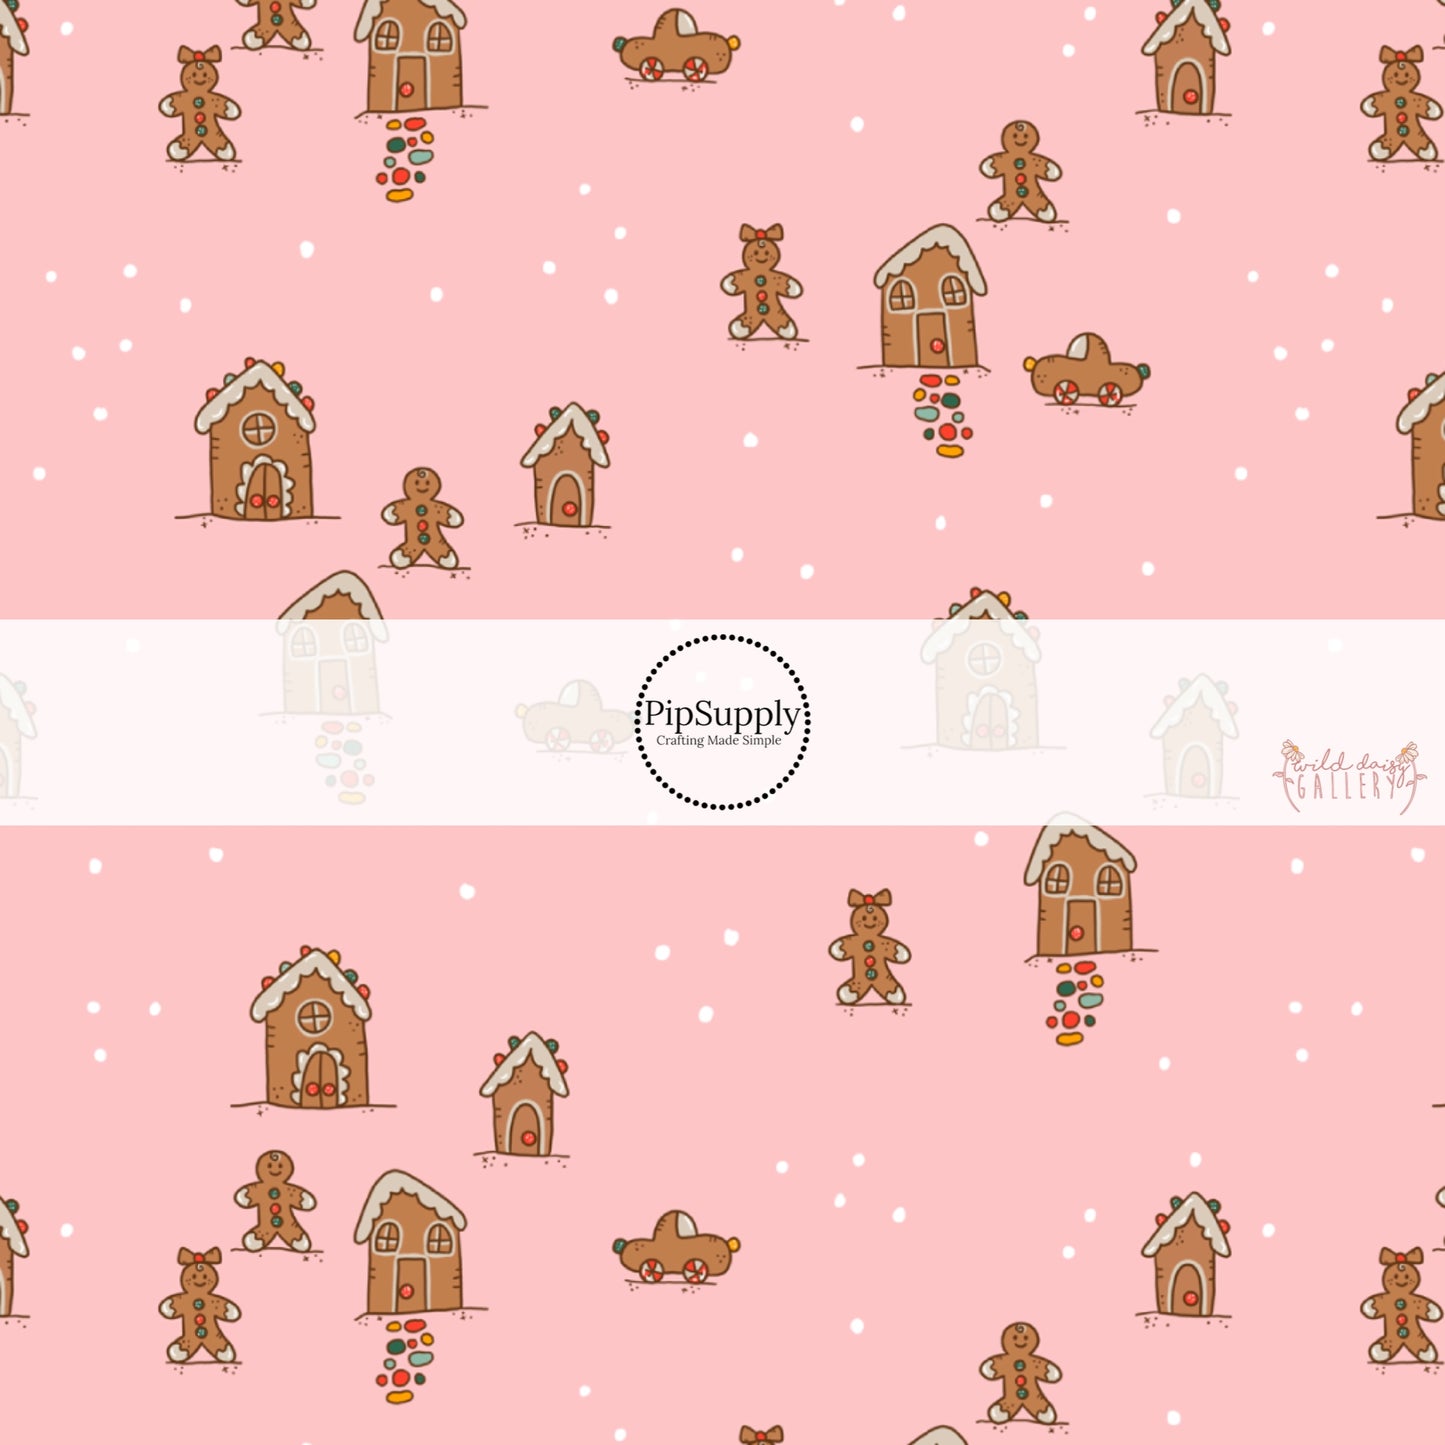 Pink gingerbread people and gingerbread houses fabric by the yard.